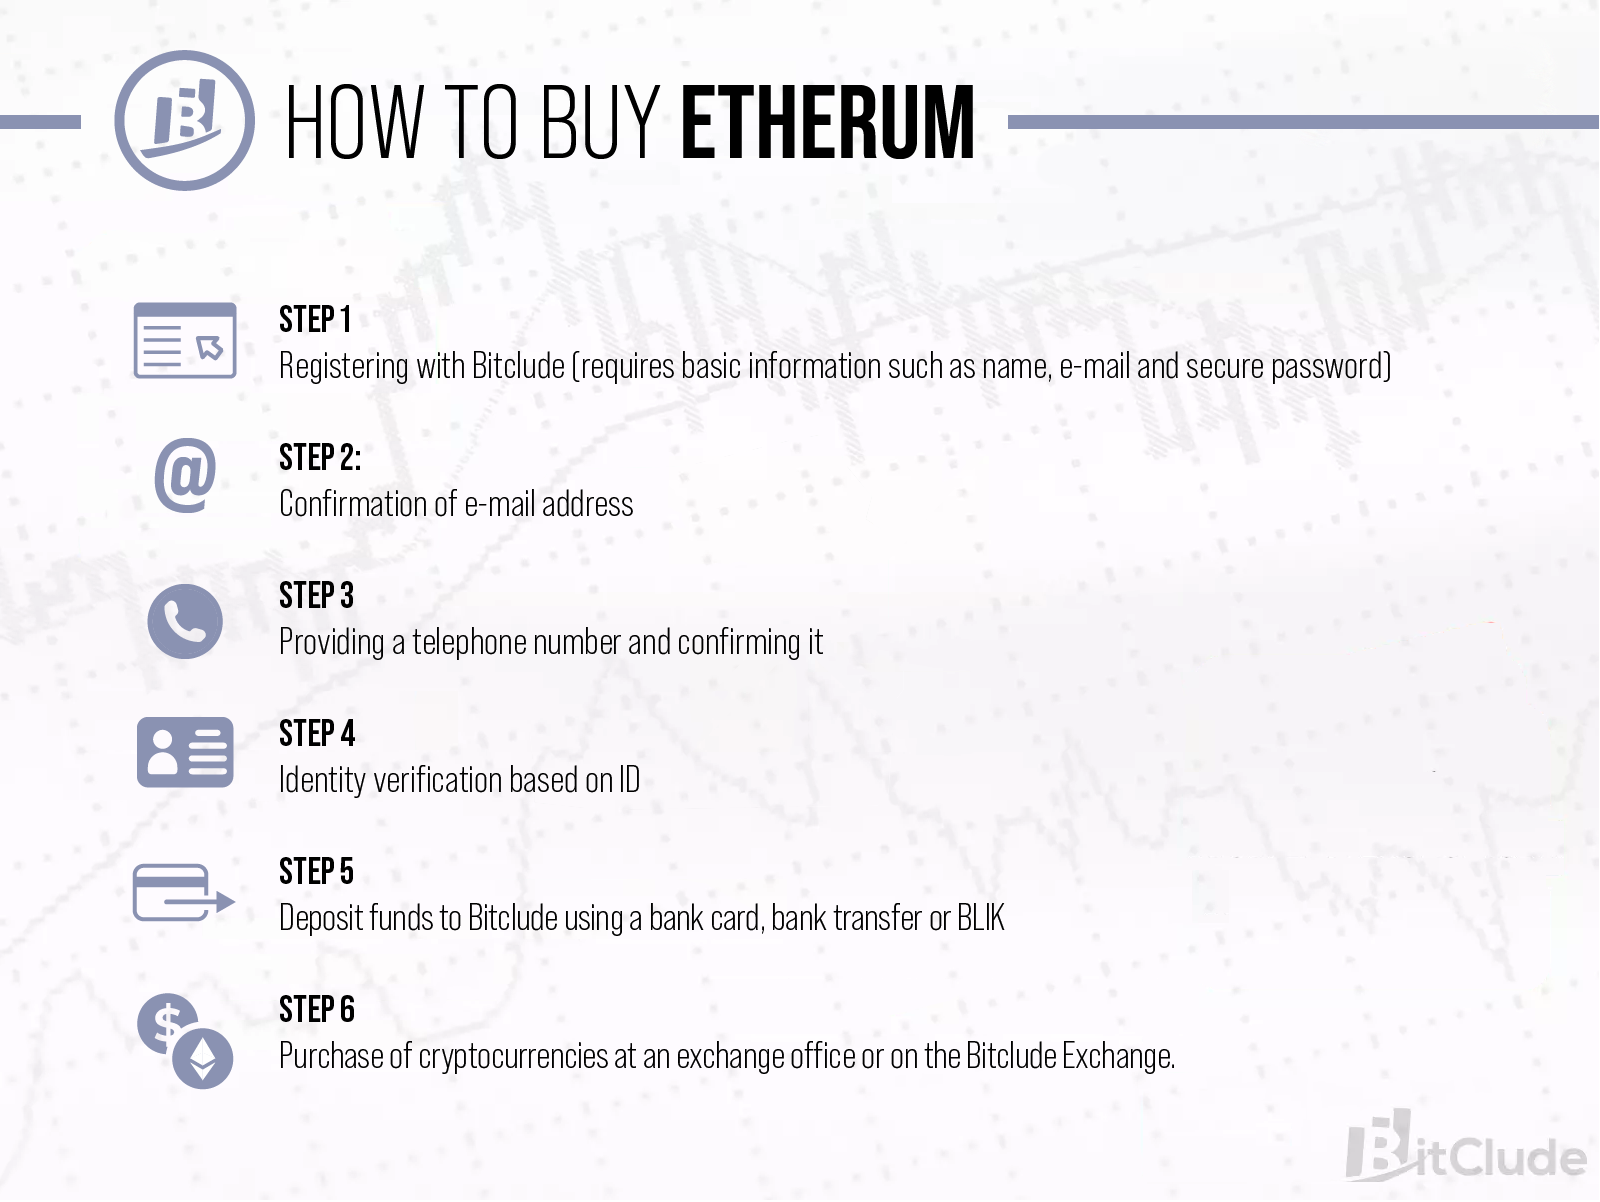 Buying Ethereum is just 6 steps. From registering an account on Egera, all the way to depositing funds and purchasing cryptocurrencies.